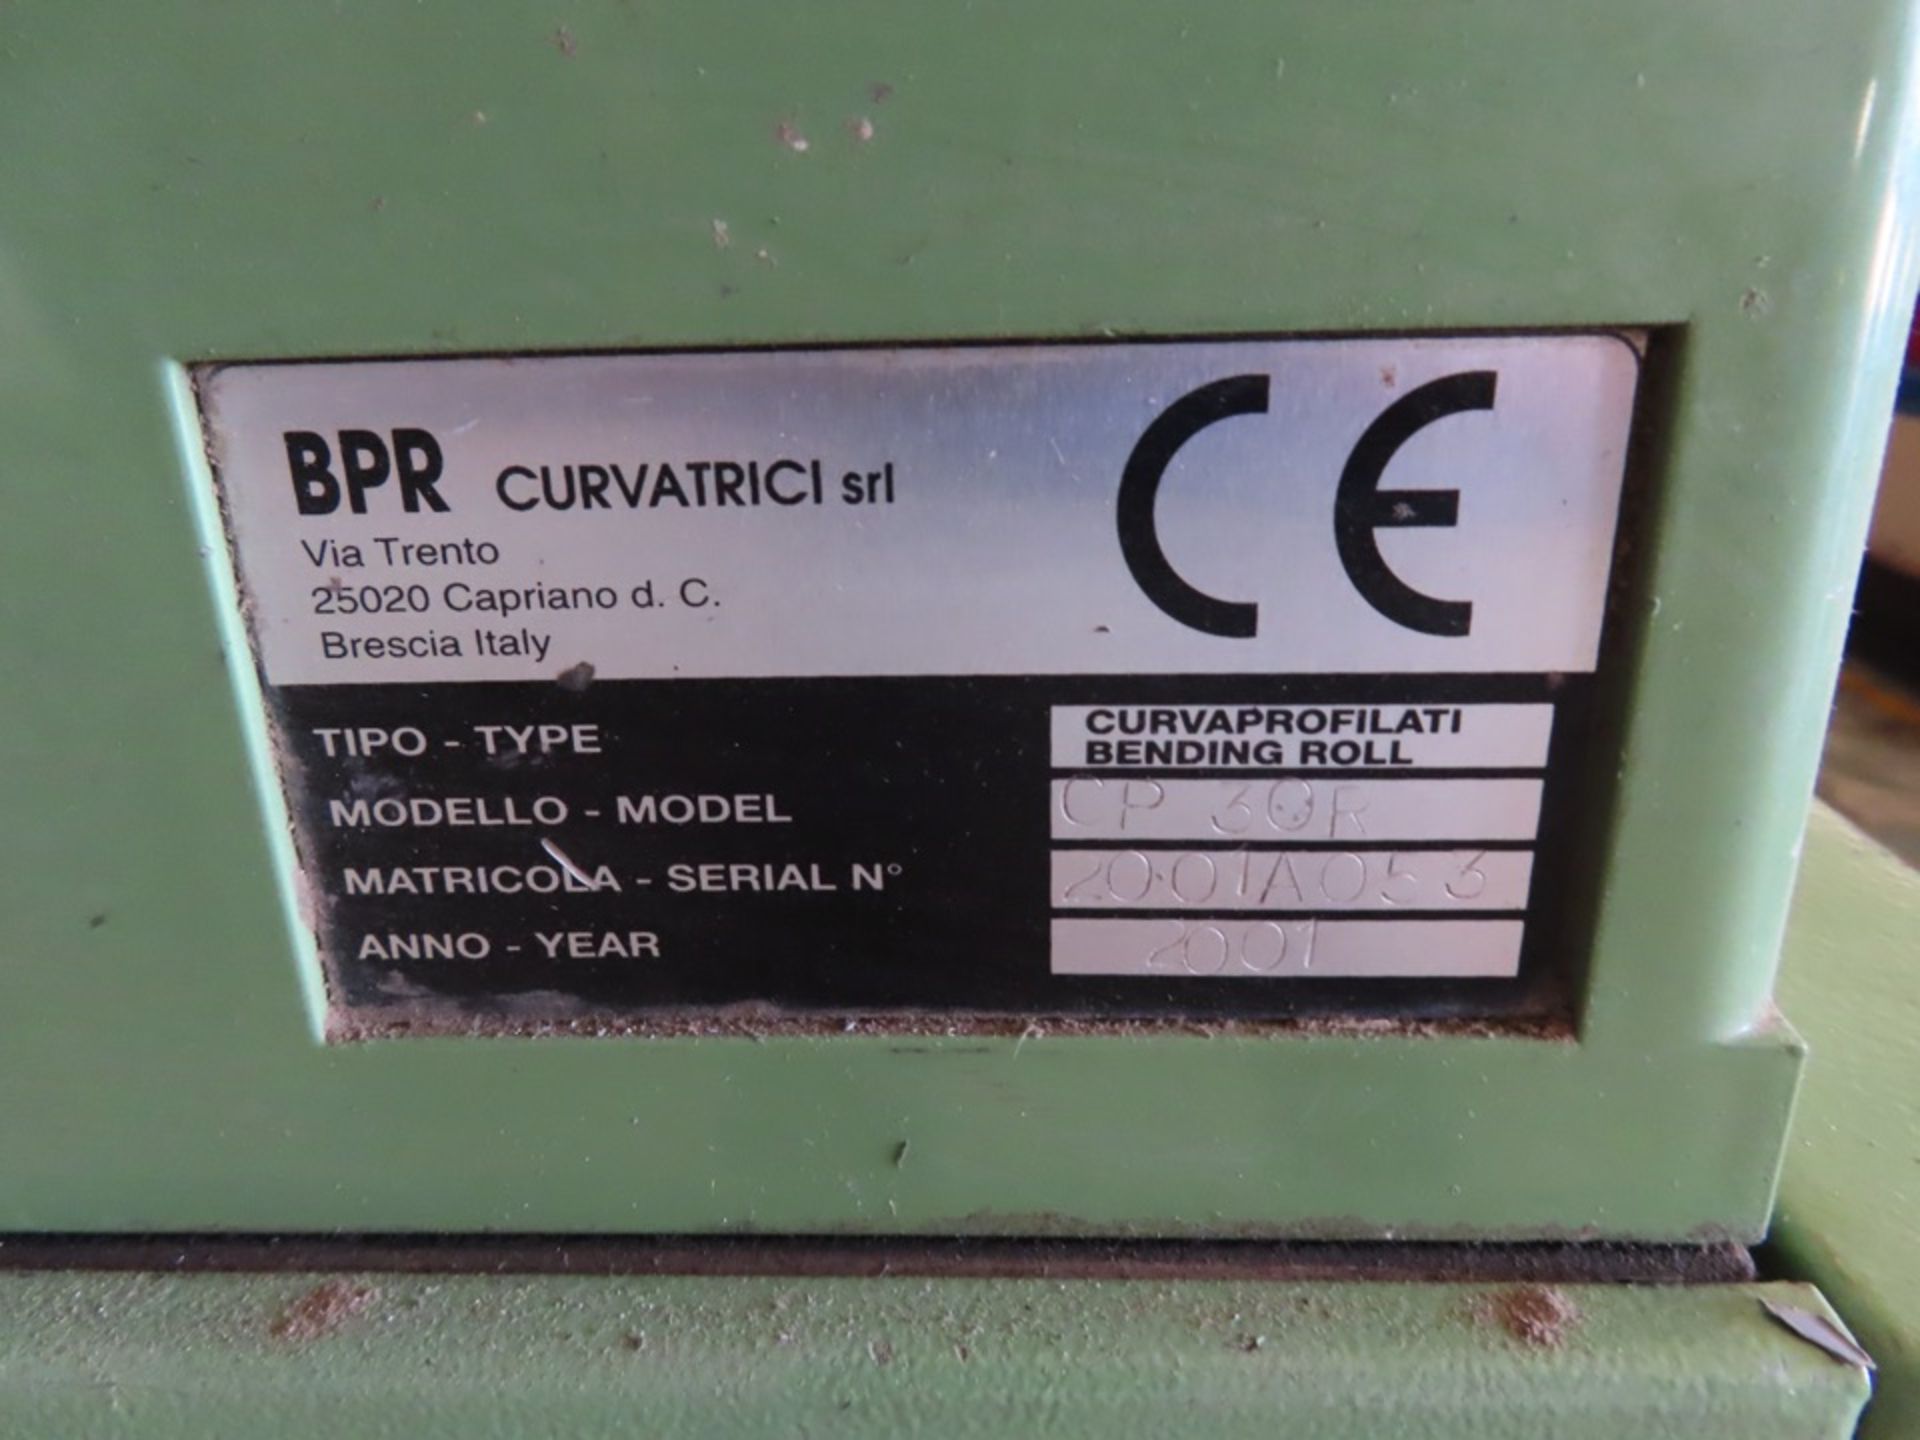 2001 BPR CURVATRICI VERT./HORIZ. STRUCTURAL BENDING ROLL, M# CP30R, S/N 2001A053 - Image 5 of 7